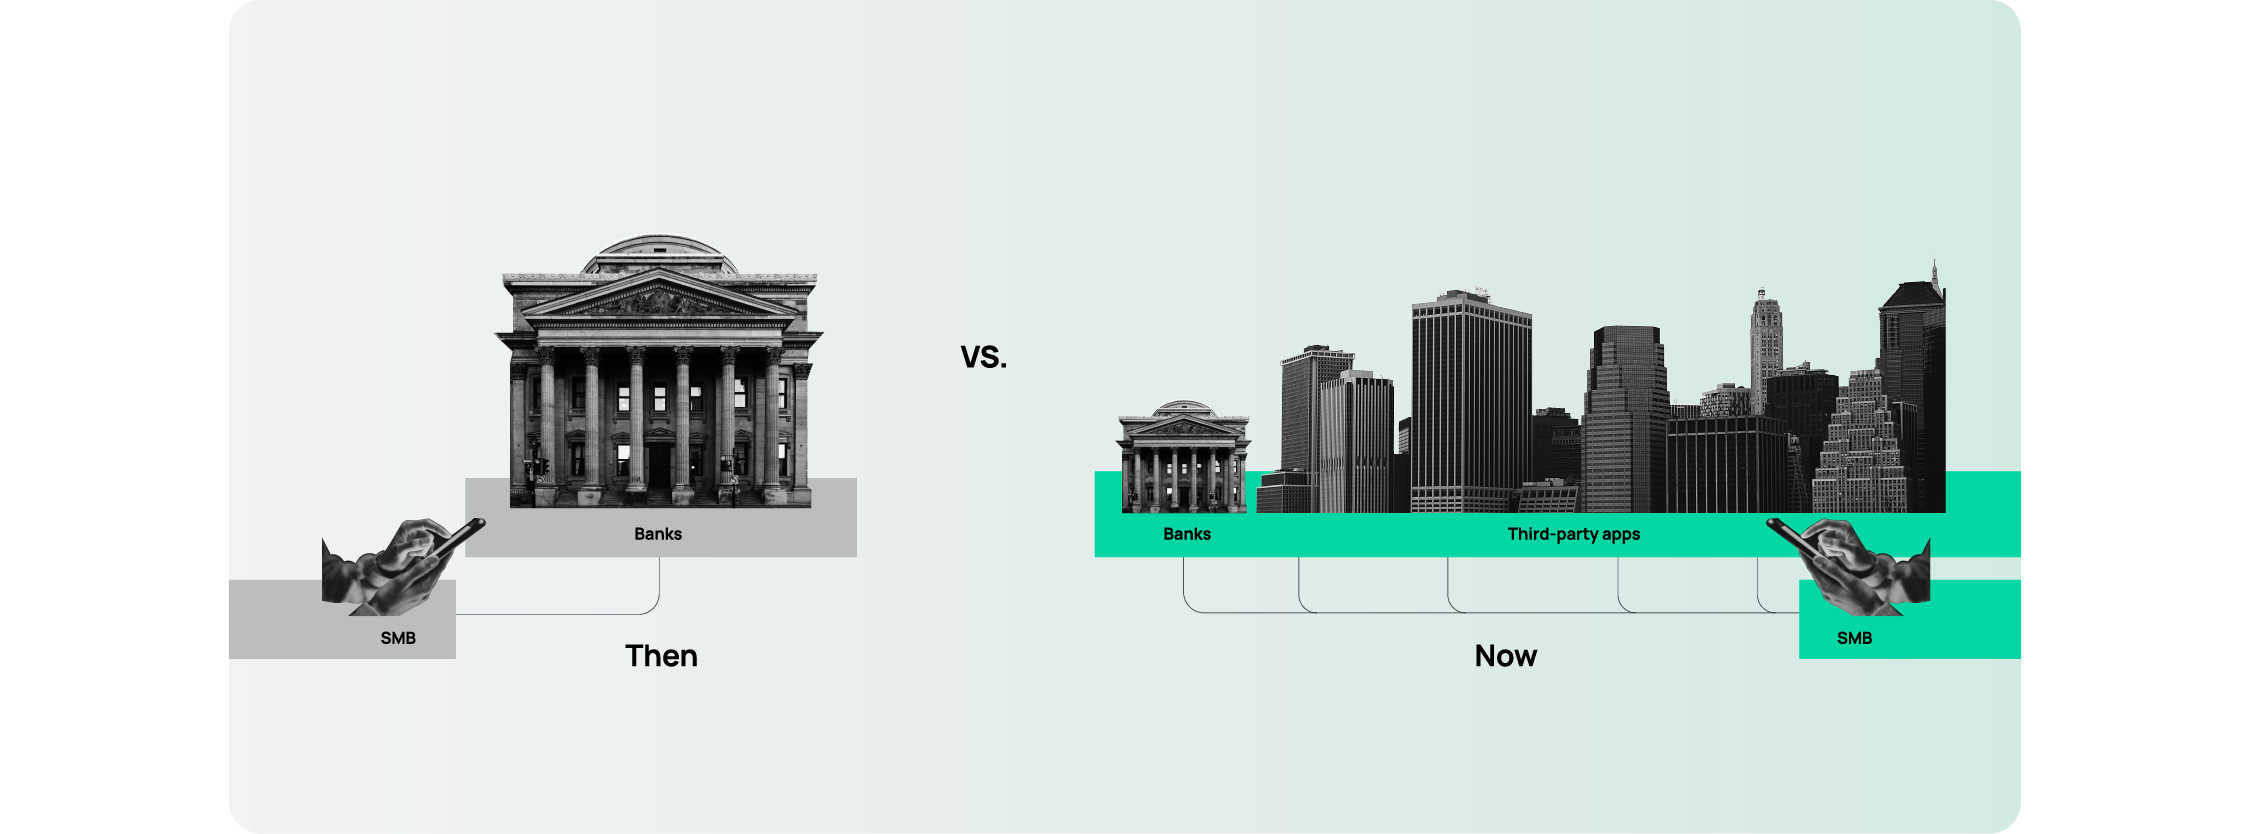 SMB Financial Services - Then vs. Now